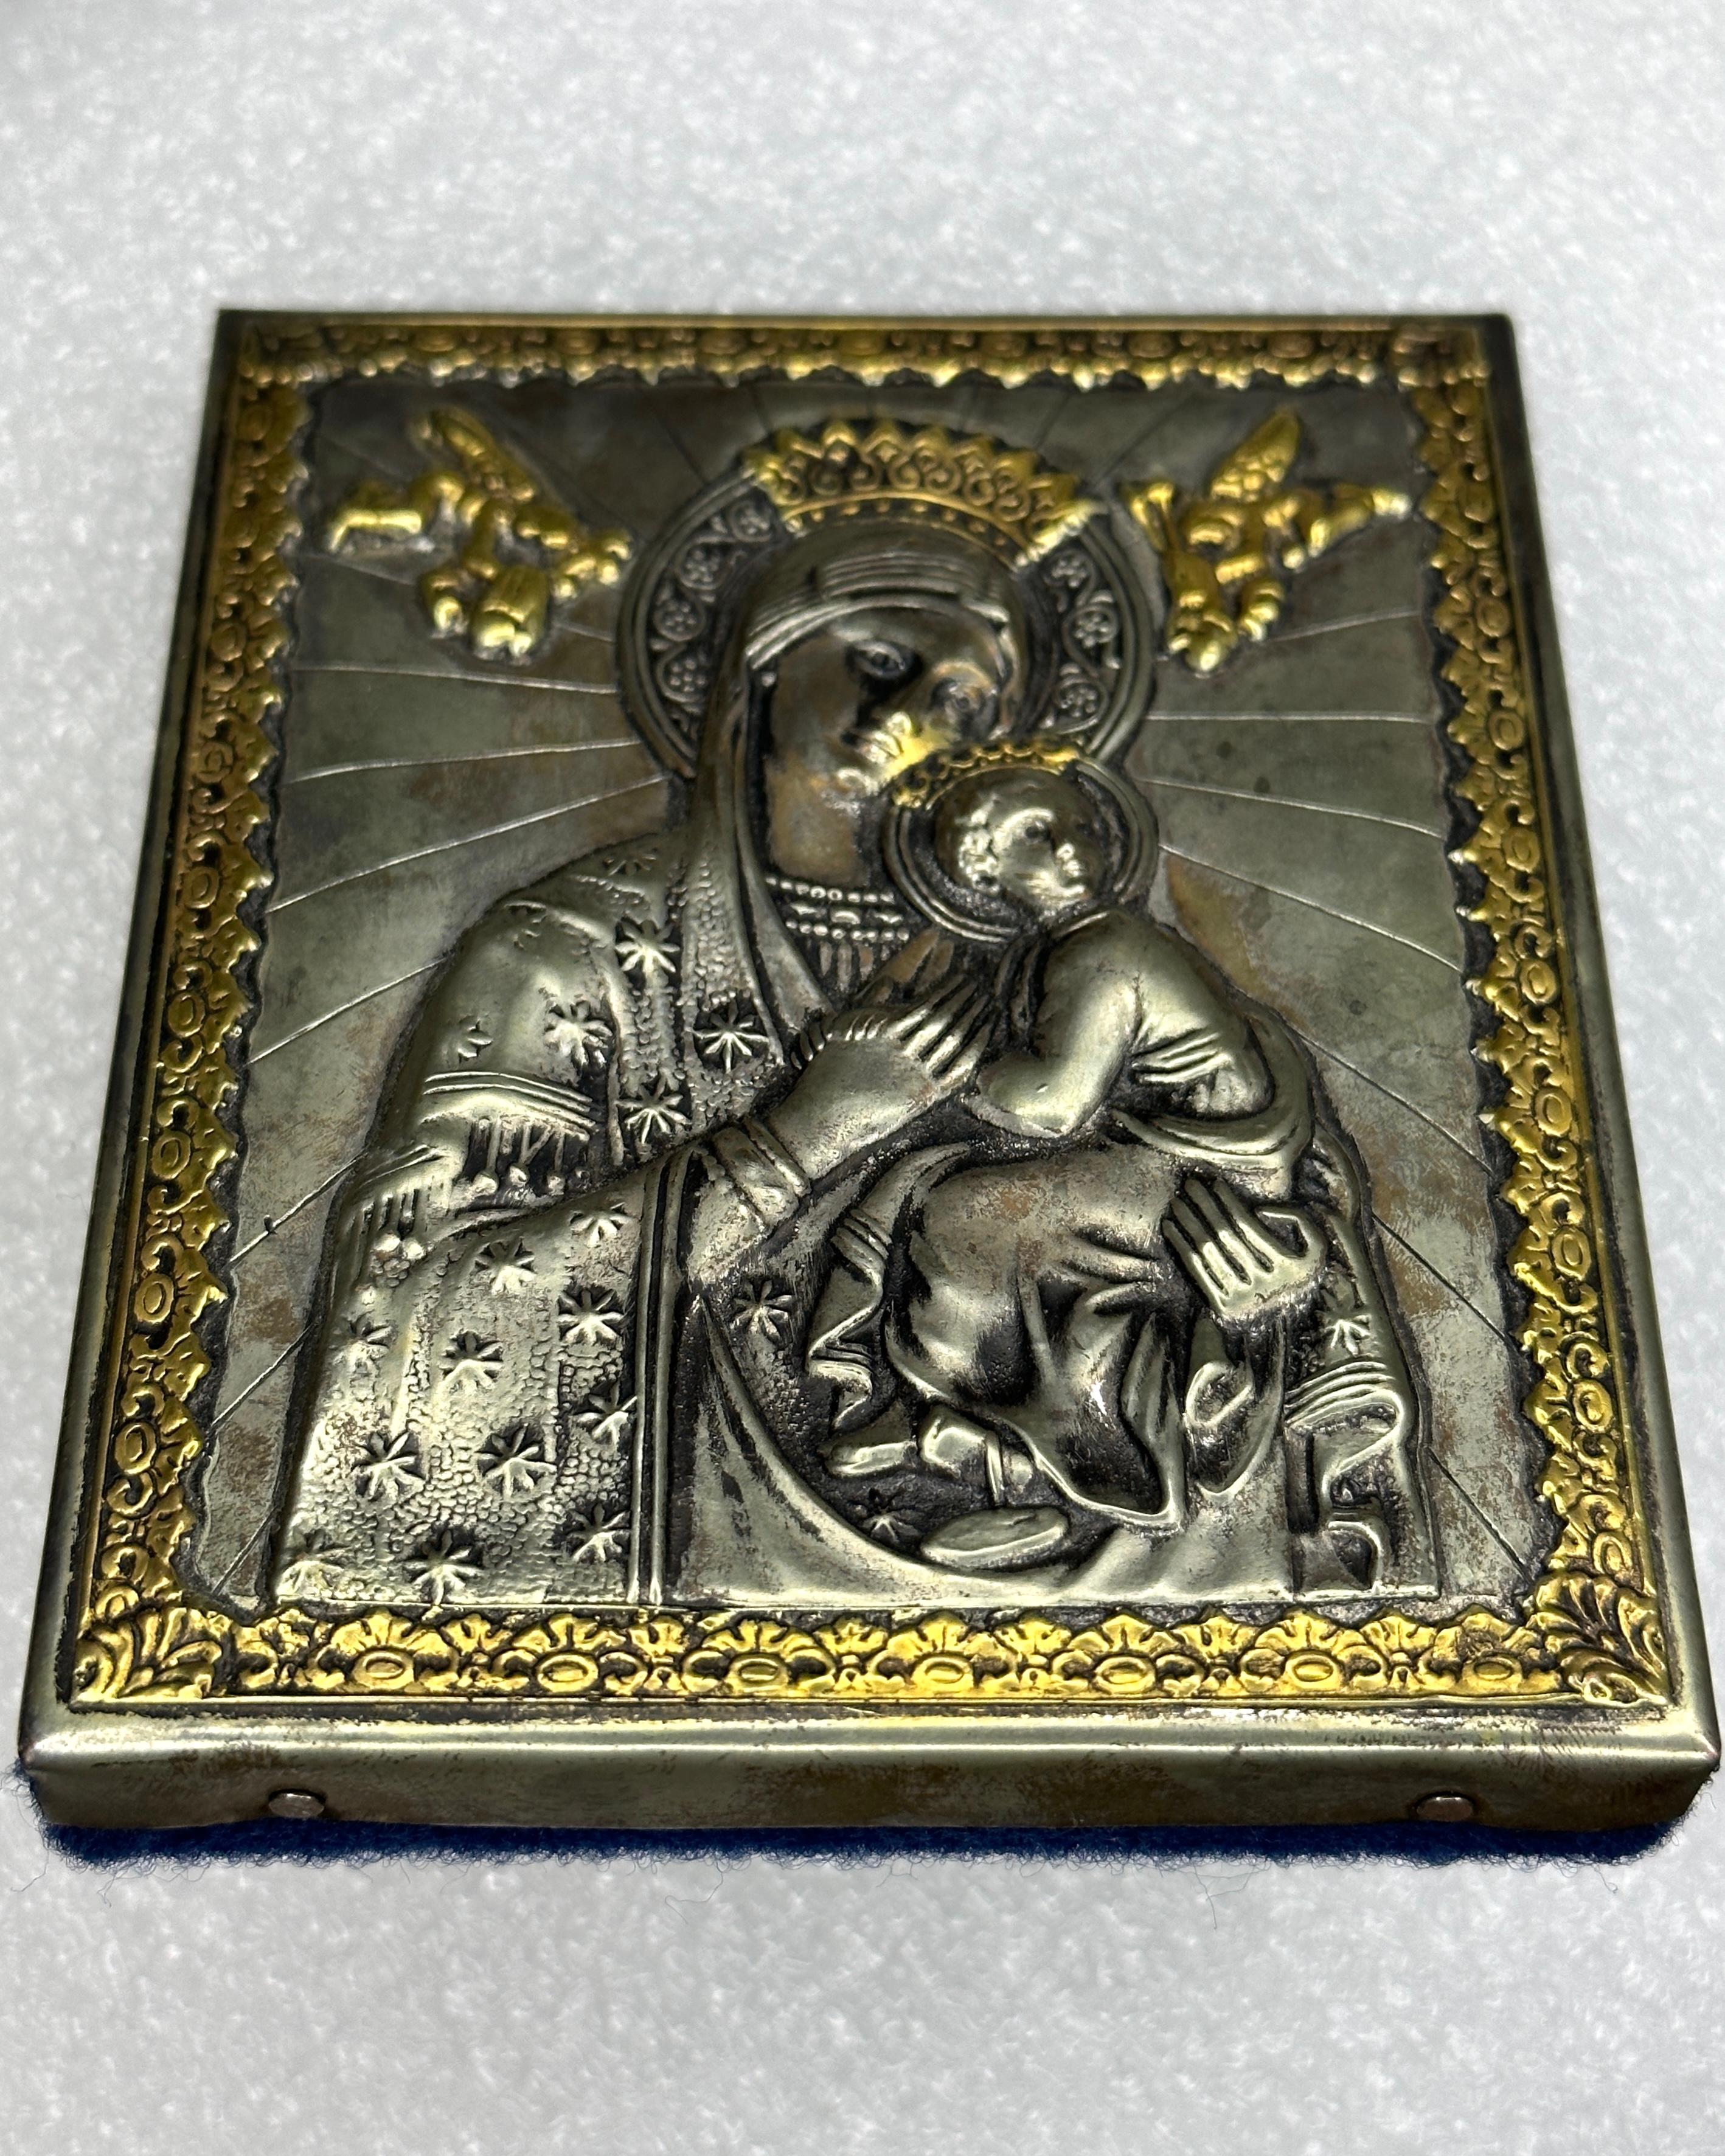 Russian icon of Madonna and Child from the early 20th Century.  The handmade icon features silvered sheet metal over wood with Repoussé work featuring etched, engraved, and hammered motifs of regal and religious significance.  Notice the details of